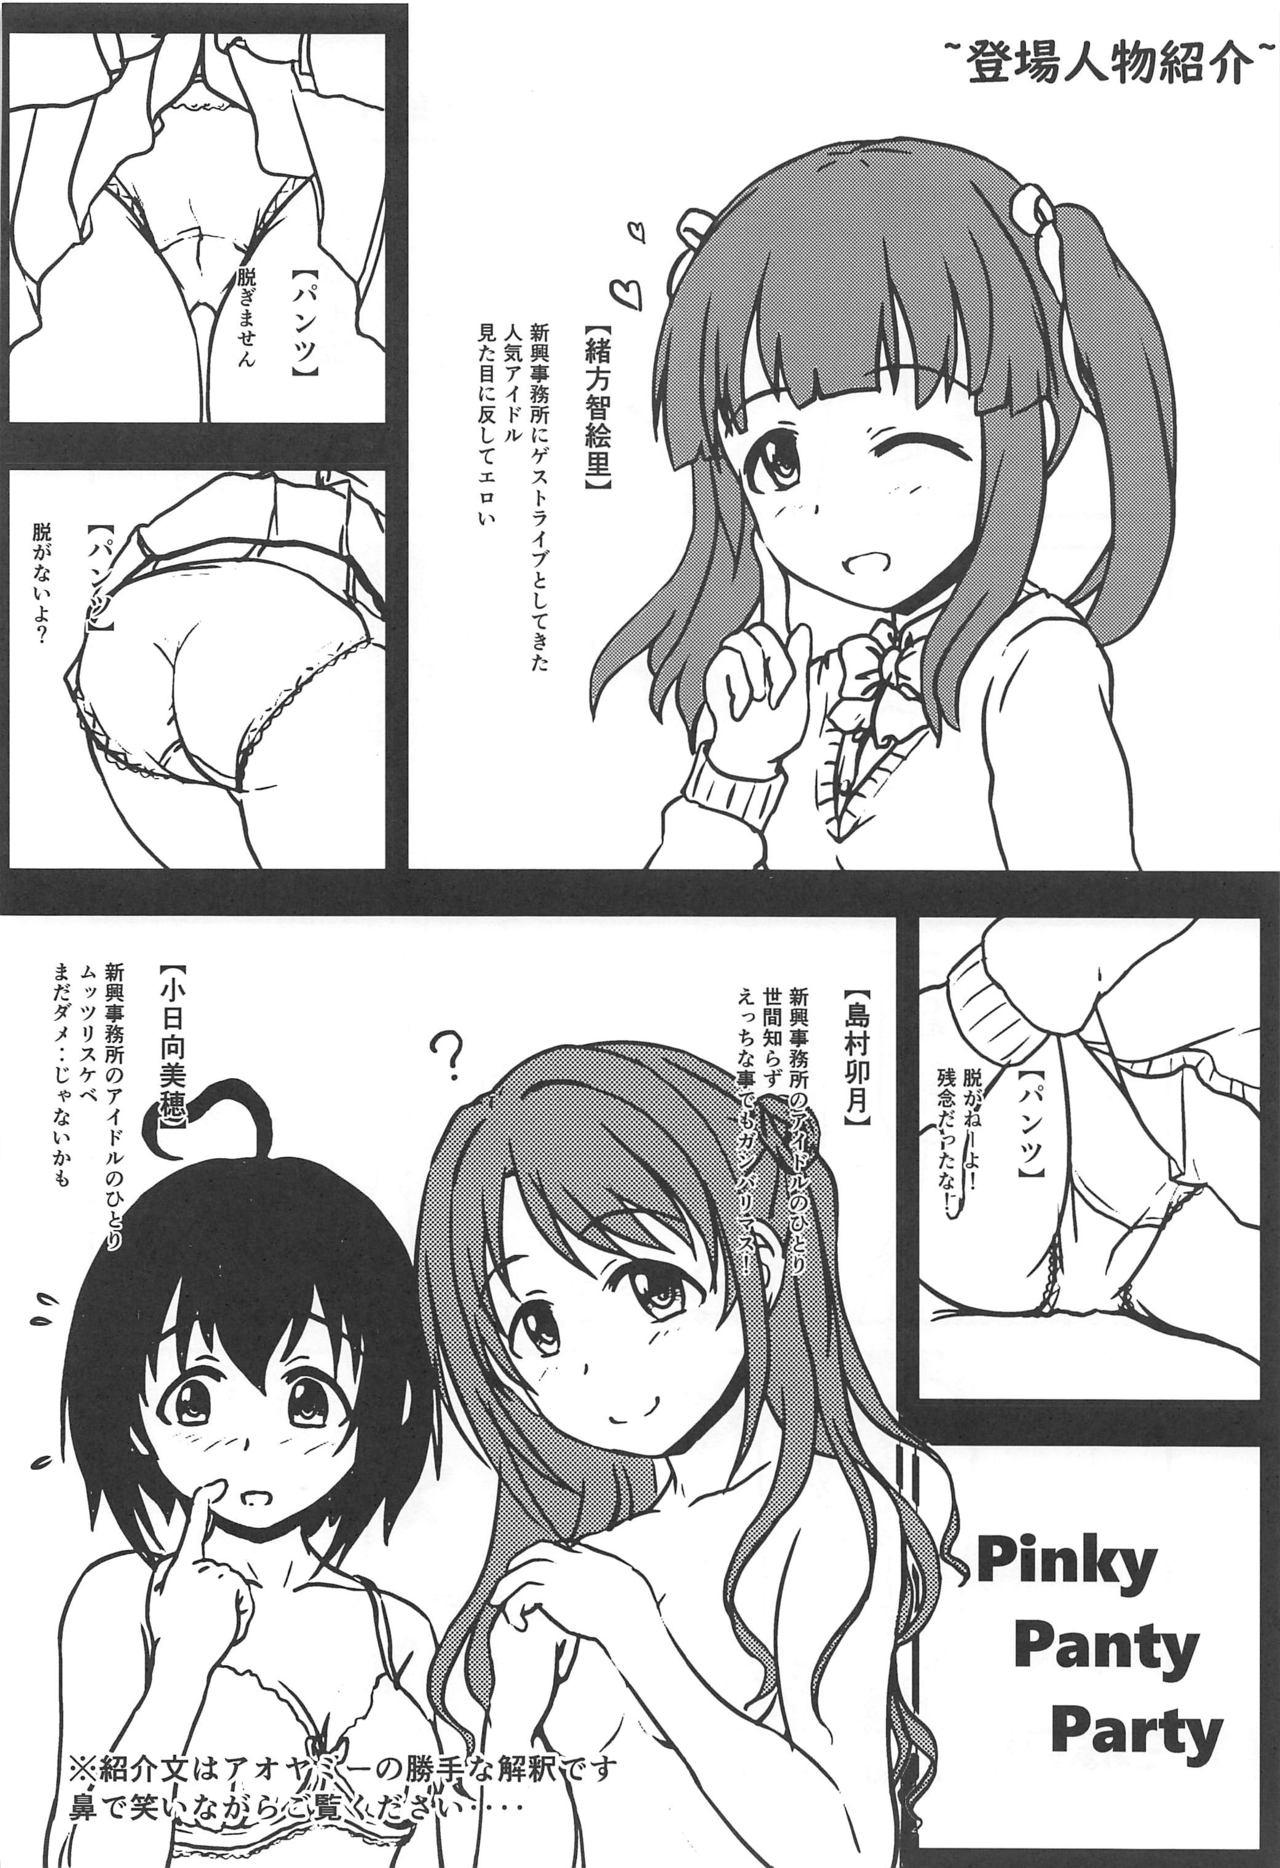 Mature Pinky Panty Party - The idolmaster Nice Ass - Page 3